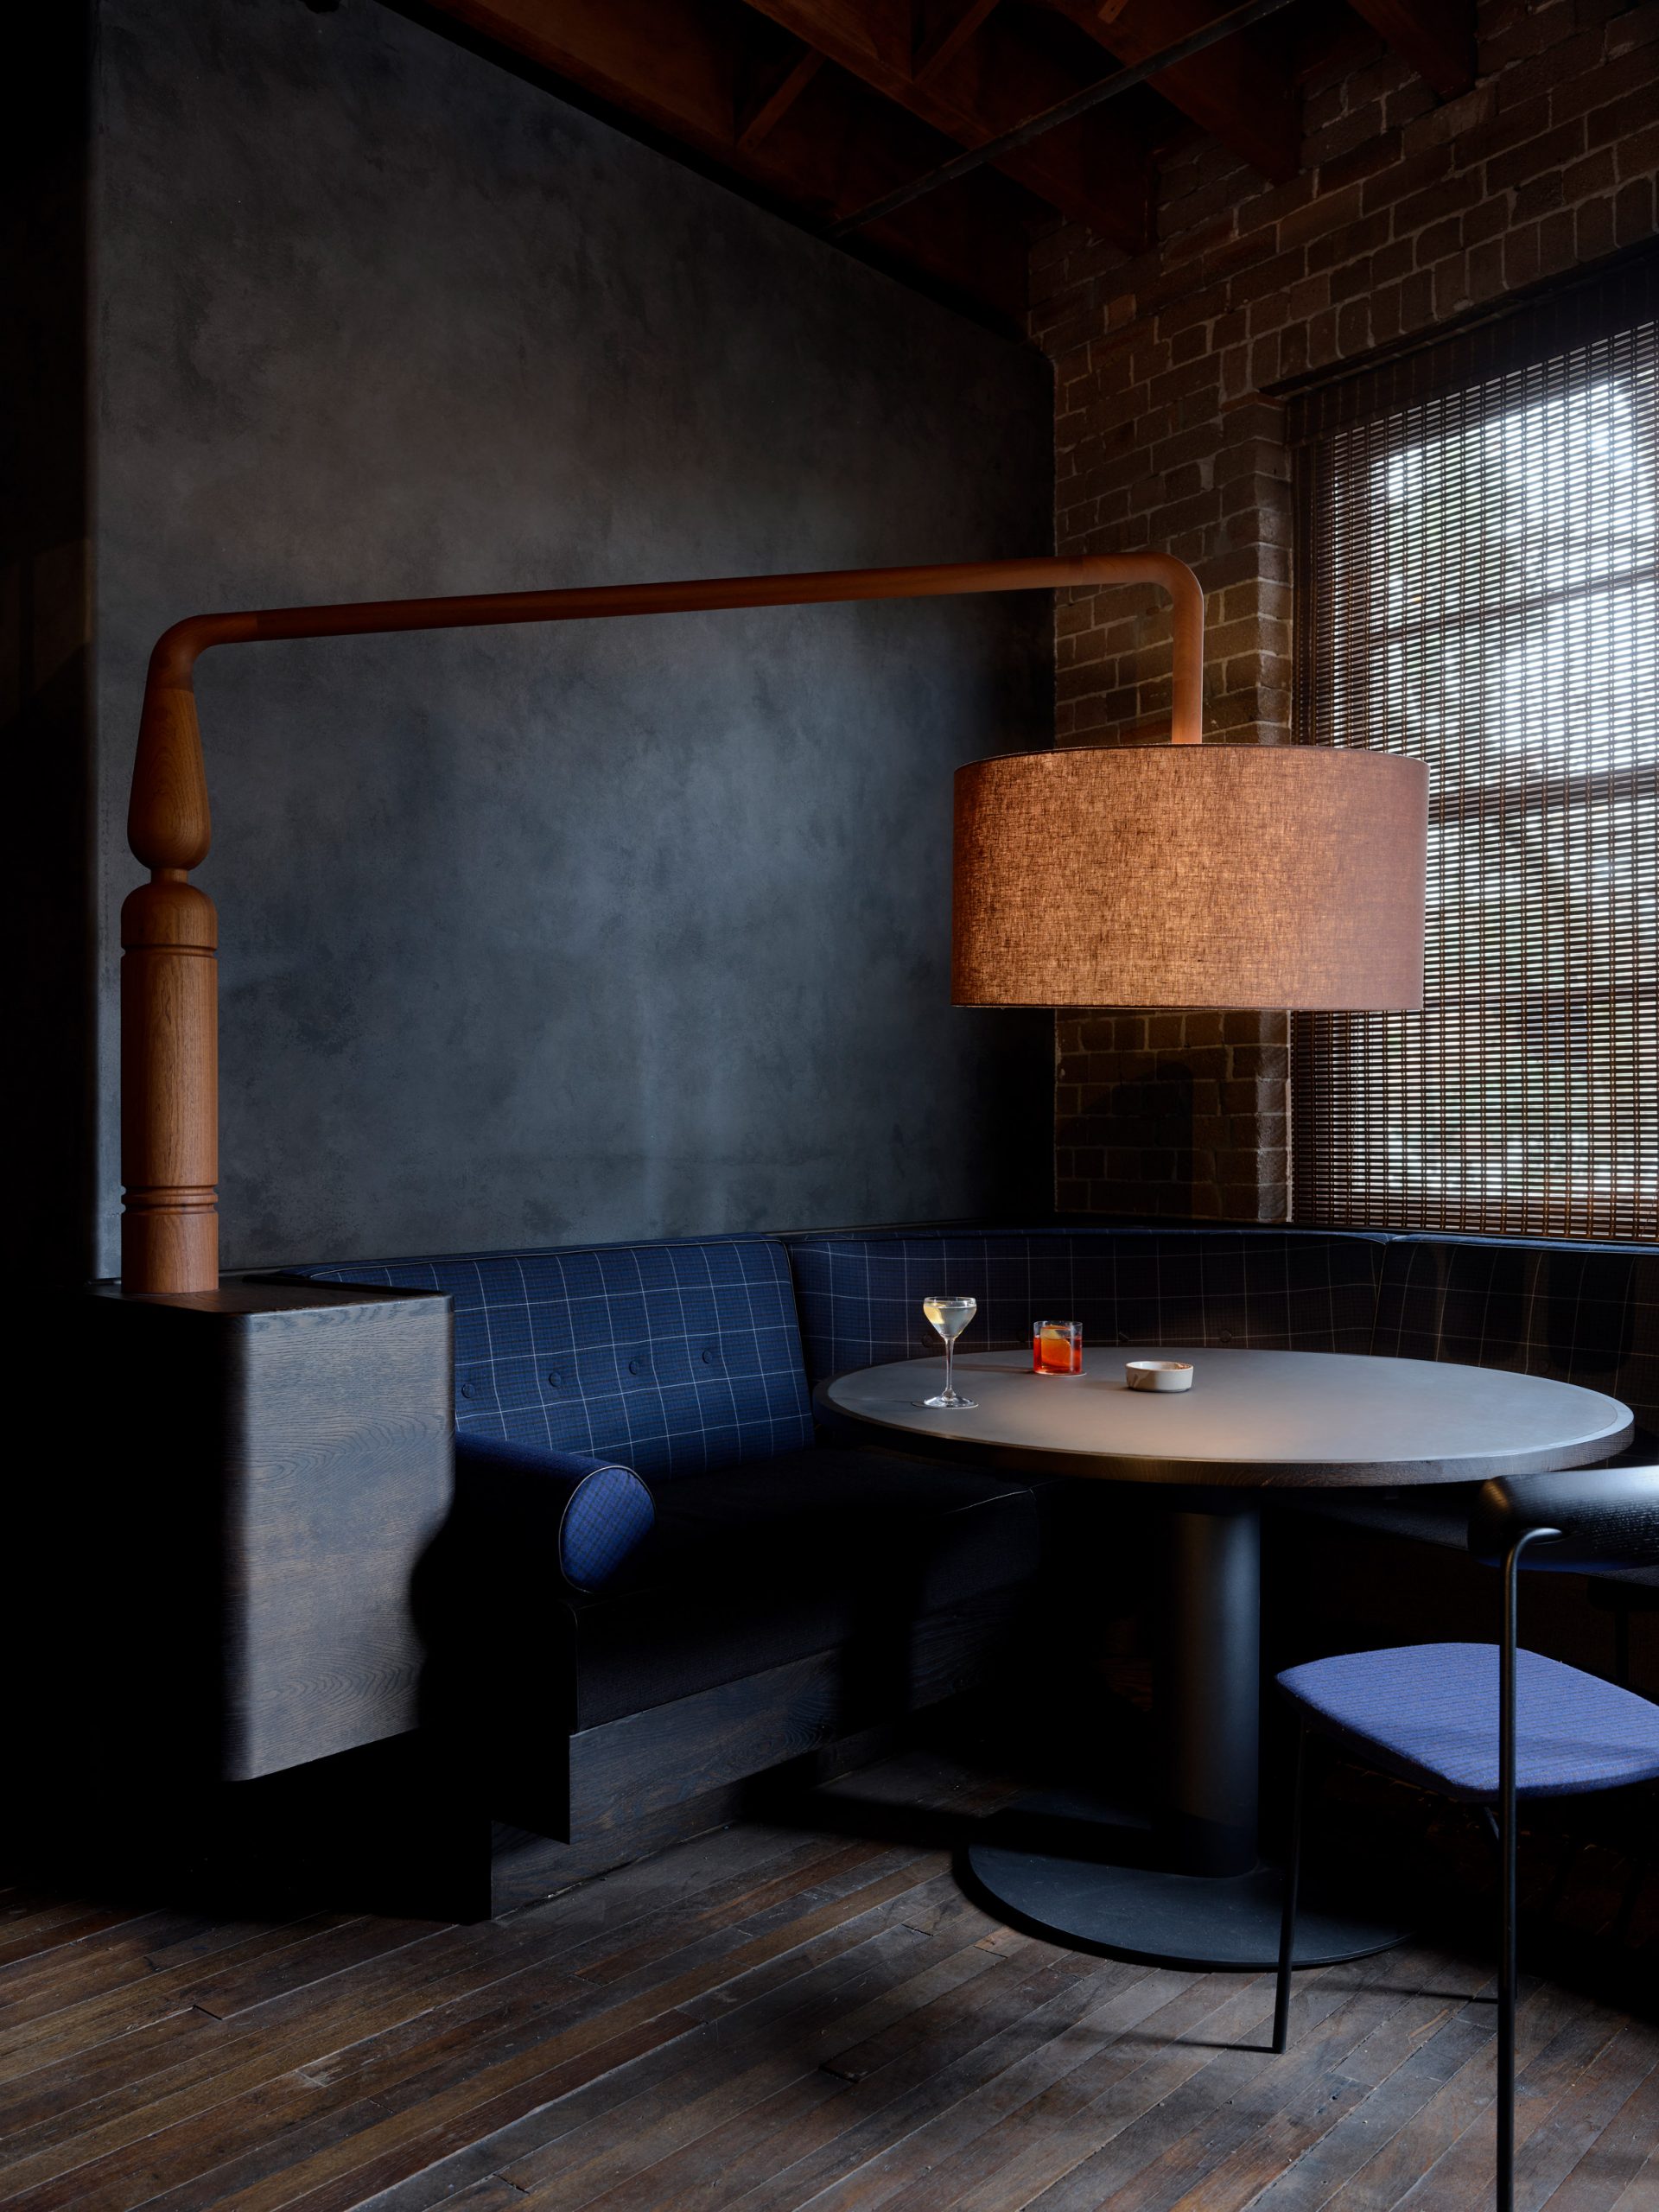 Interiors of Four Pillars' gin laboratory are dressed with blue furniture